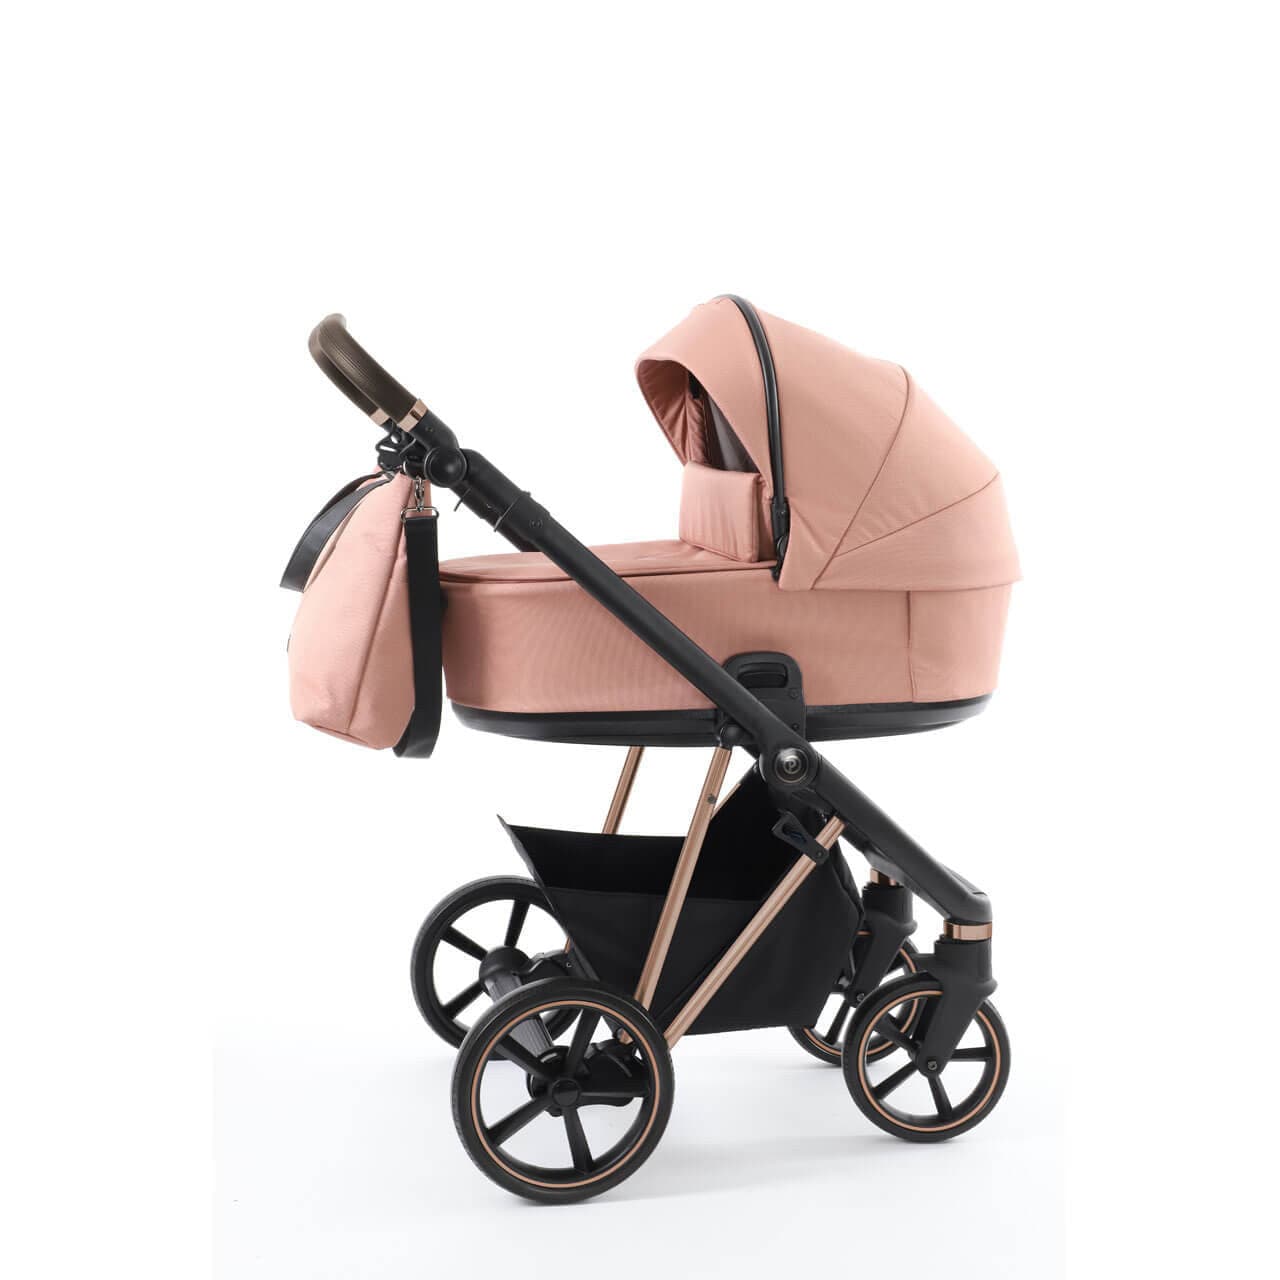 Babystyle Prestige Vogue 8 Piece Travel System Bundle - Coral - Copper | For Your Little One